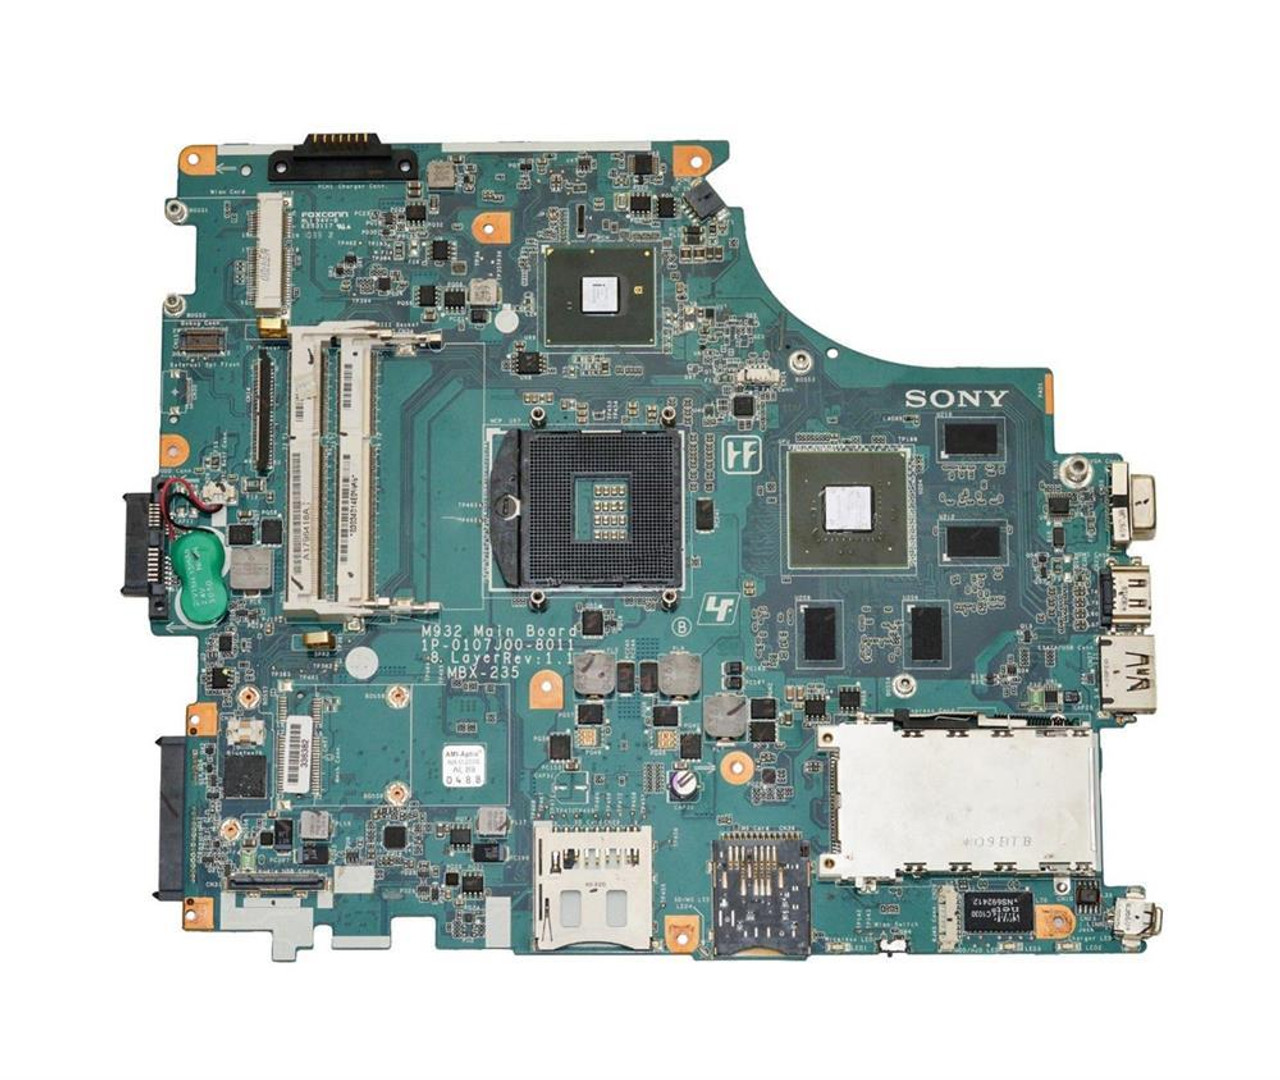 A1796418A Sony System Board (Motherboard) for Vaio Vpc-f M930 (Refurbished)